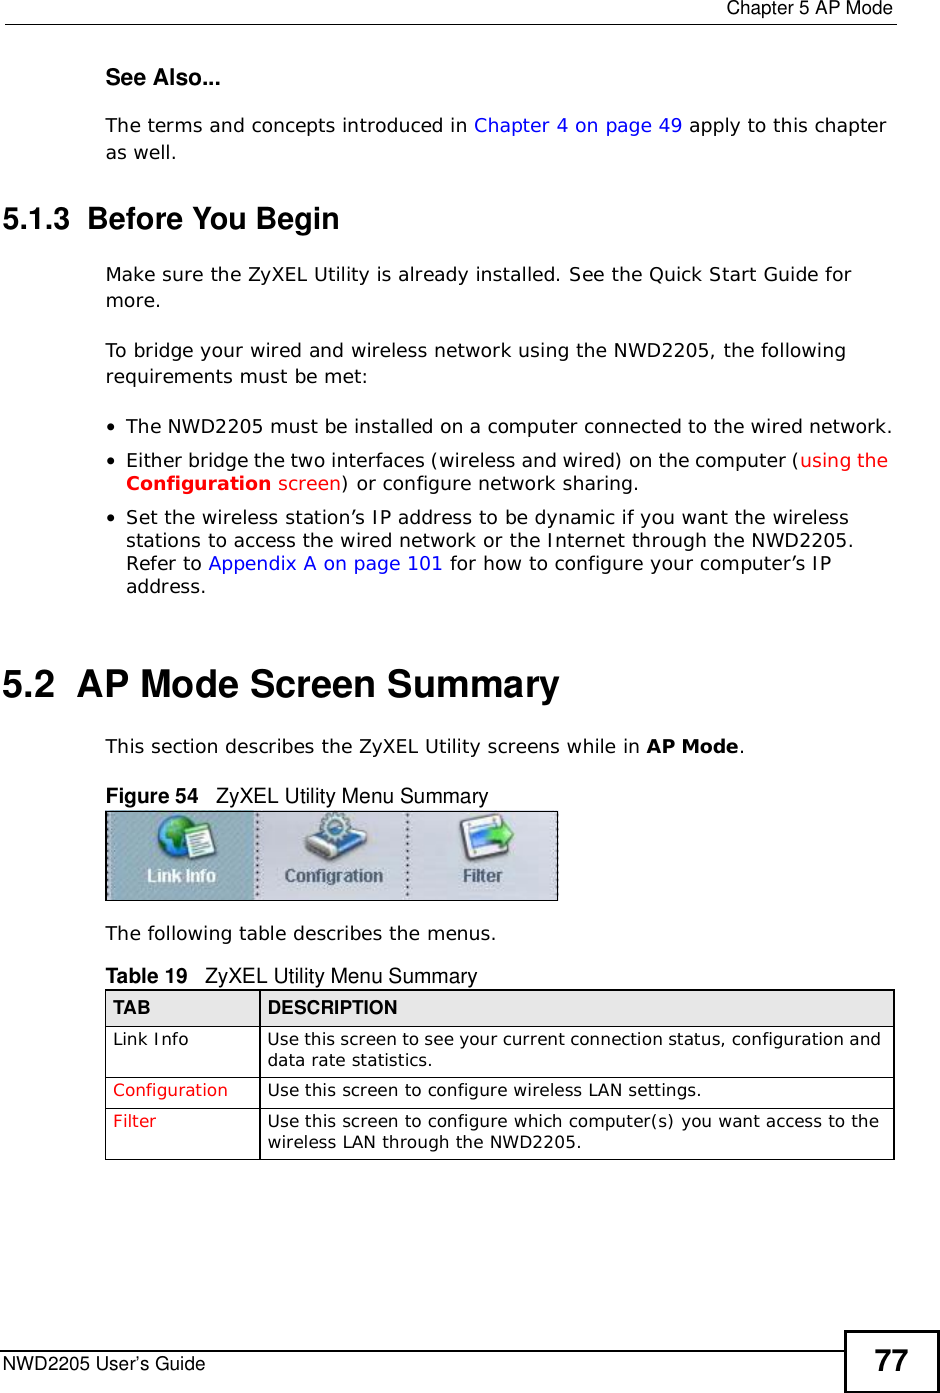  Chapter 5AP ModeNWD2205 User’s Guide 77See Also...The terms and concepts introduced in Chapter 4 on page 49 apply to this chapter as well.5.1.3  Before You BeginMake sure the ZyXEL Utility is already installed. See the Quick Start Guide for more.To bridge your wired and wireless network using the NWD2205, the following requirements must be met:•The NWD2205 must be installed on a computer connected to the wired network.•Either bridge the two interfaces (wireless and wired) on the computer (using the Configuration screen) or configure network sharing.•Set the wireless station’s IP address to be dynamic if you want the wireless stations to access the wired network or the Internet through the NWD2205. Refer to Appendix A on page 101 for how to configure your computer’s IP address.5.2  AP Mode Screen Summary This section describes the ZyXEL Utility screens while in AP Mode.Figure 54   ZyXEL Utility Menu Summary The following table describes the menus.   Table 19   ZyXEL Utility Menu SummaryTAB DESCRIPTIONLink InfoUse this screen to see your current connection status, configuration and data rate statistics.Configuration Use this screen to configure wireless LAN settings. Filter Use this screen to configure which computer(s) you want access to the wireless LAN through the NWD2205. 